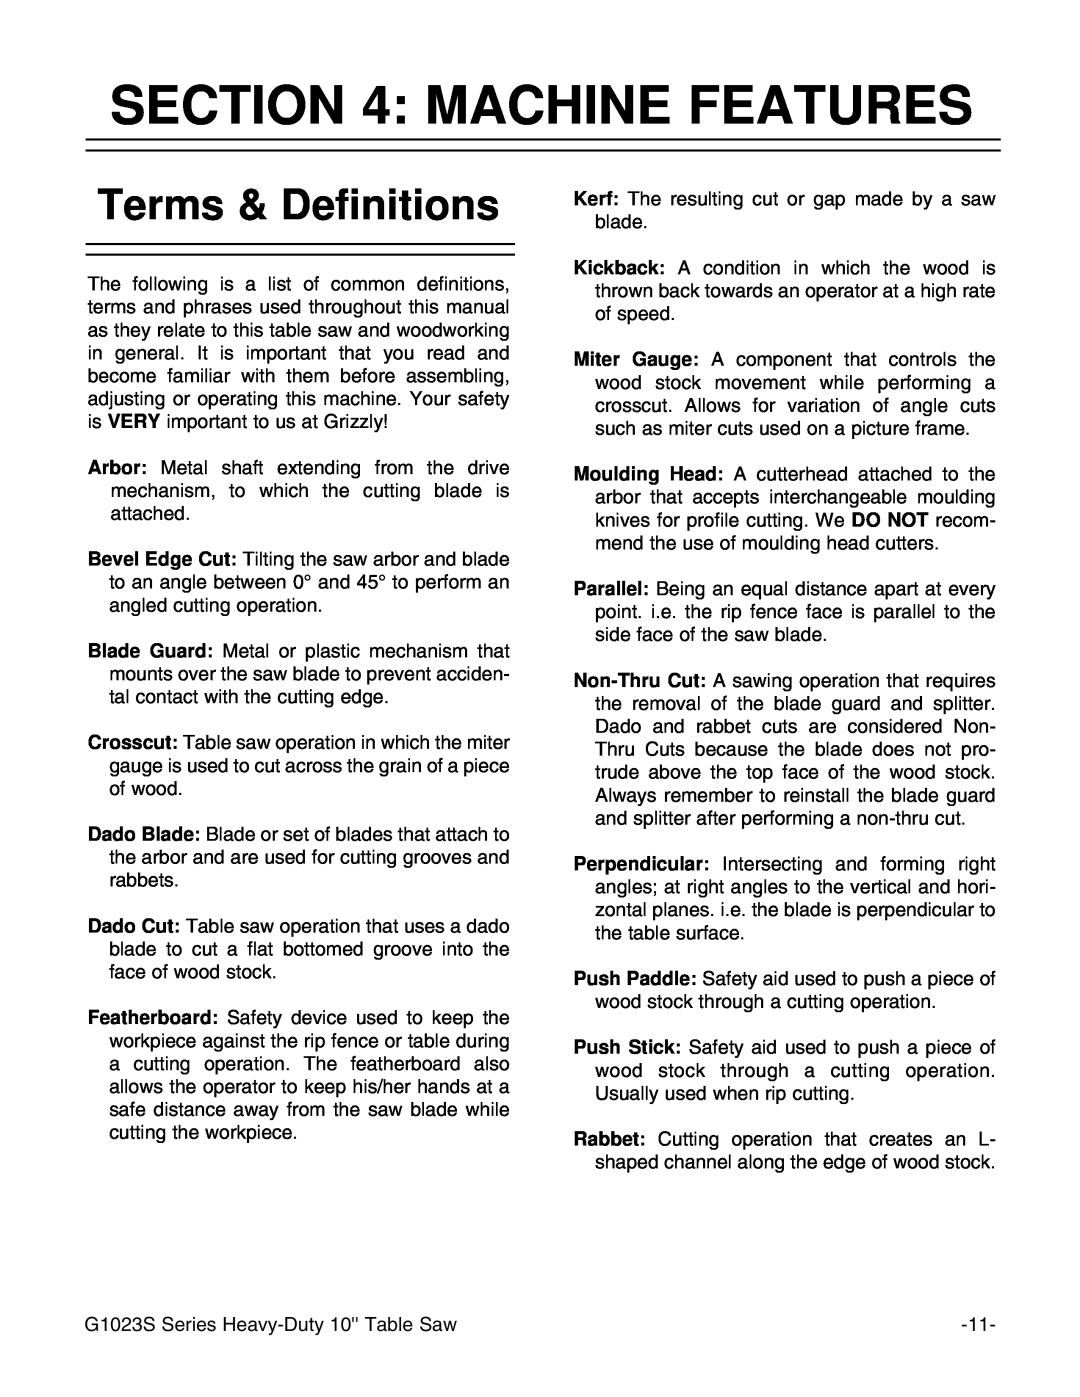 Grizzly MODEL instruction manual Machine Features, Terms & Definitions 